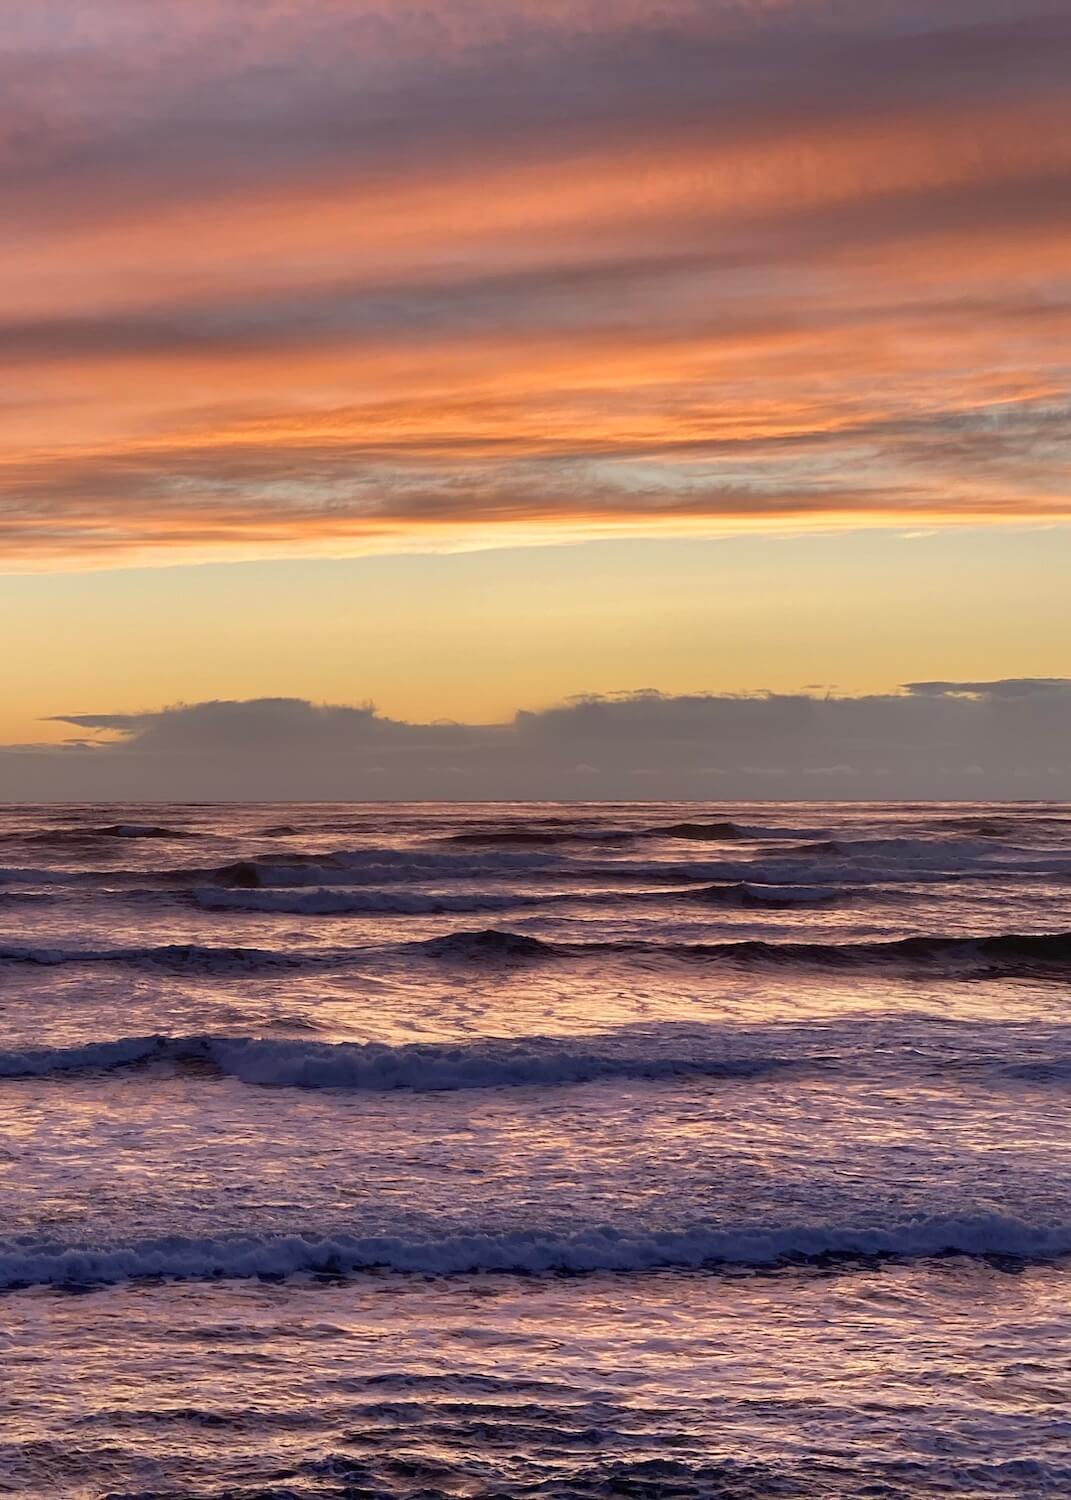 The sunsets on the Pacific Ocean creating beautiful shades of purple and pink amongst the foaming layers of waves pushing toward the sandy beach. 